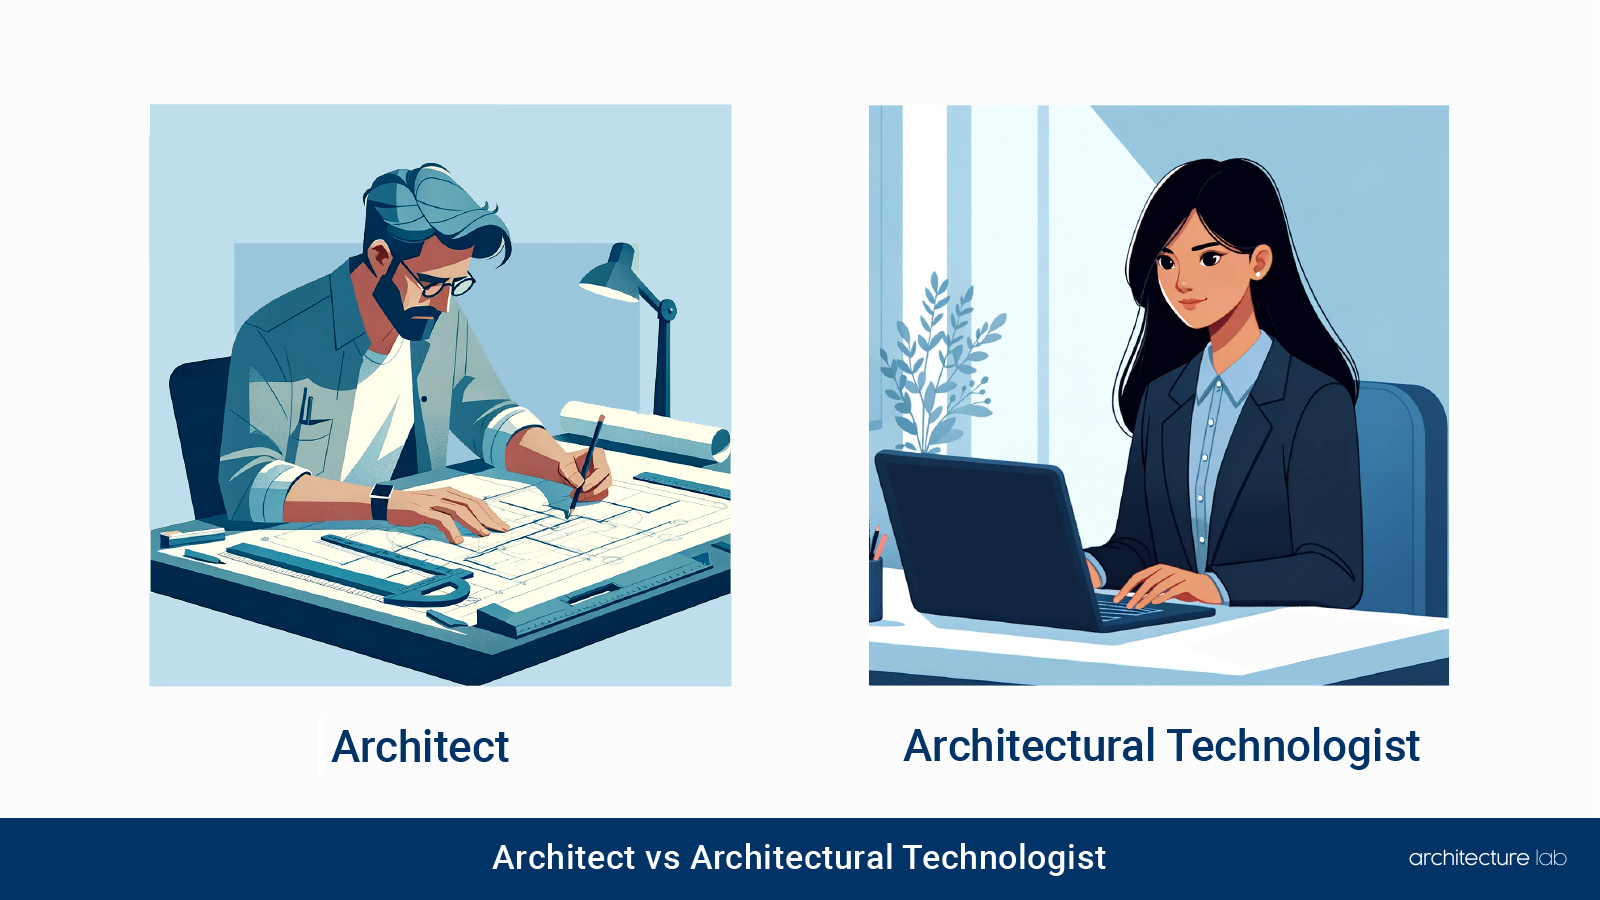 Architects vs architectural technologists: differences, similarities, duties, salaries, and education